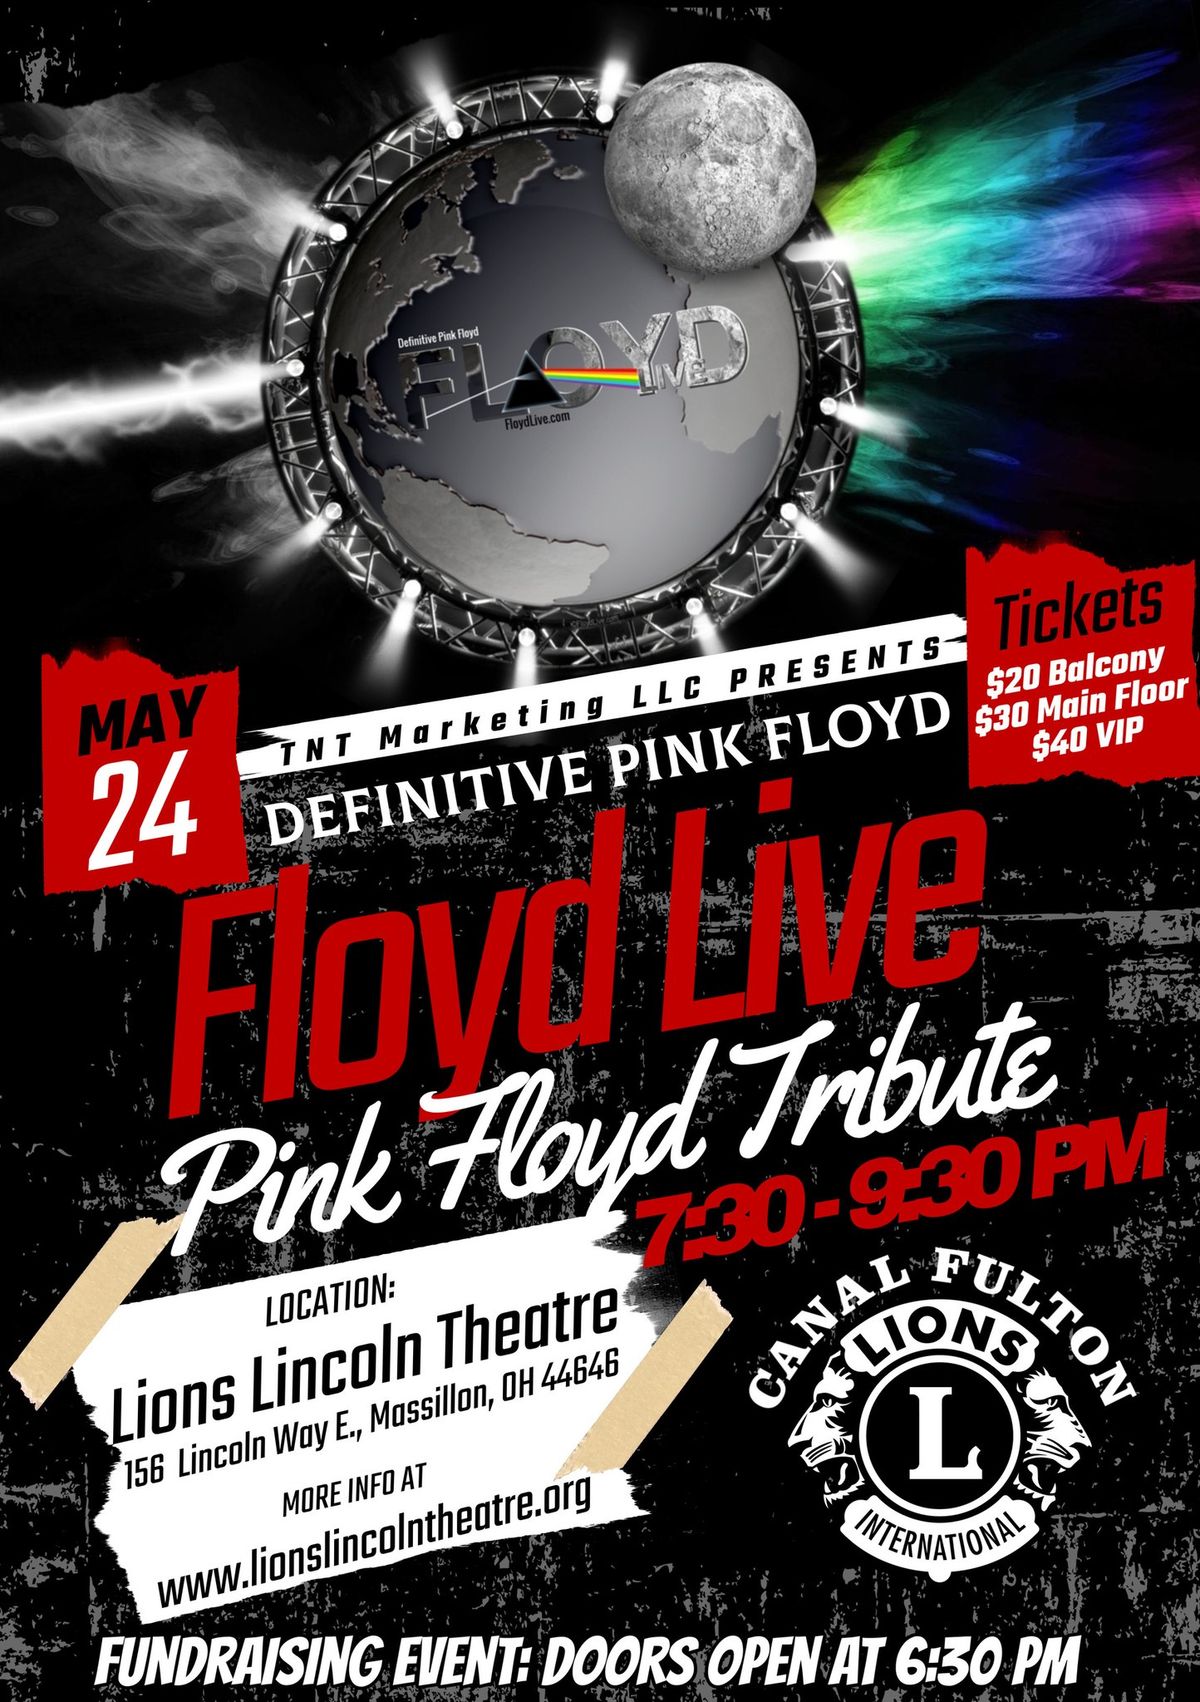 "FLOYD LIVE" Definitive Pink Floyd Tribute at Lions Lincoln Theatre on Friday May 24 7:30-9:30